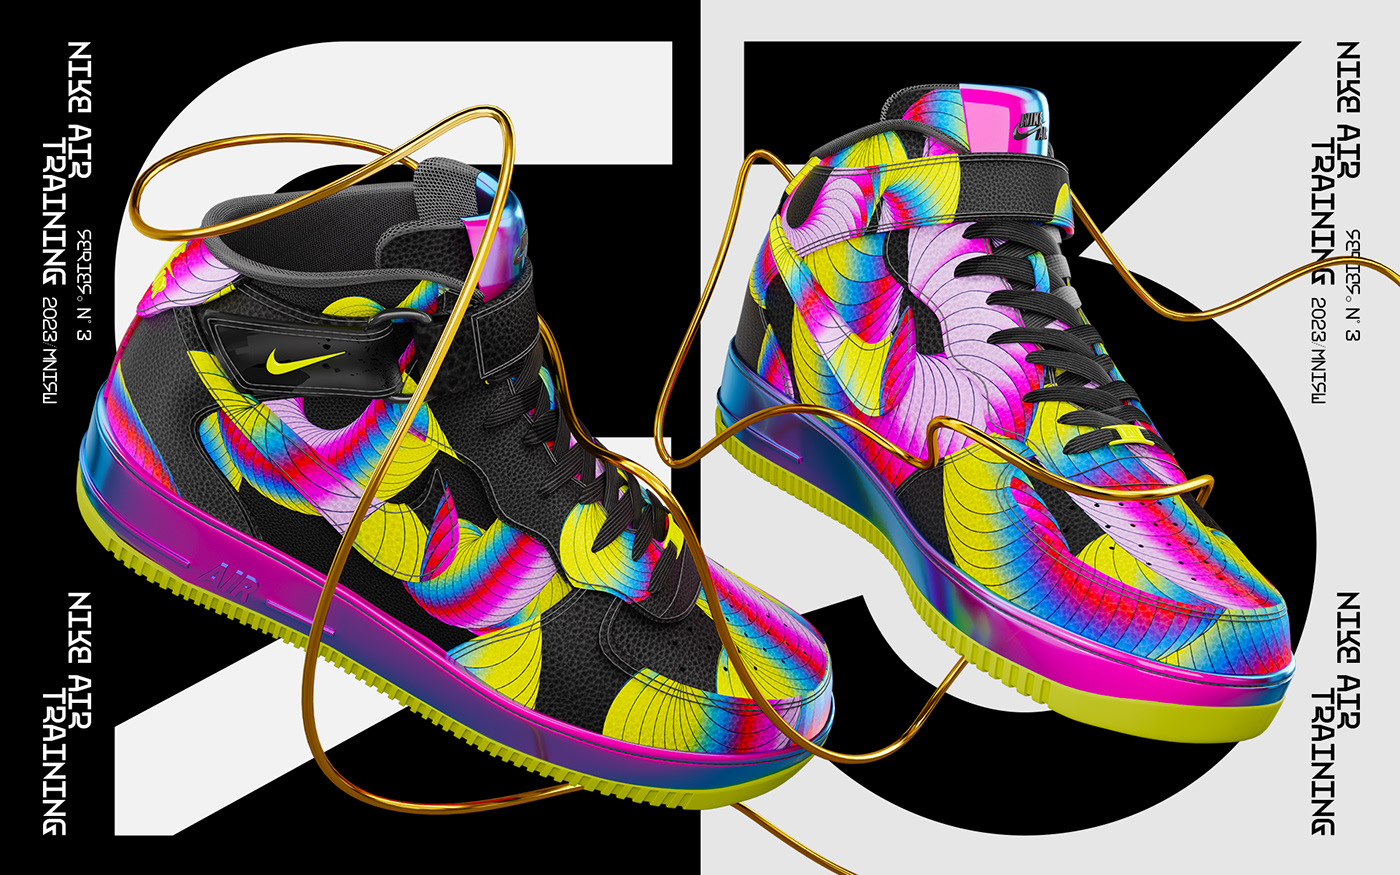 Graphic design and 3d art for a Nike Air project